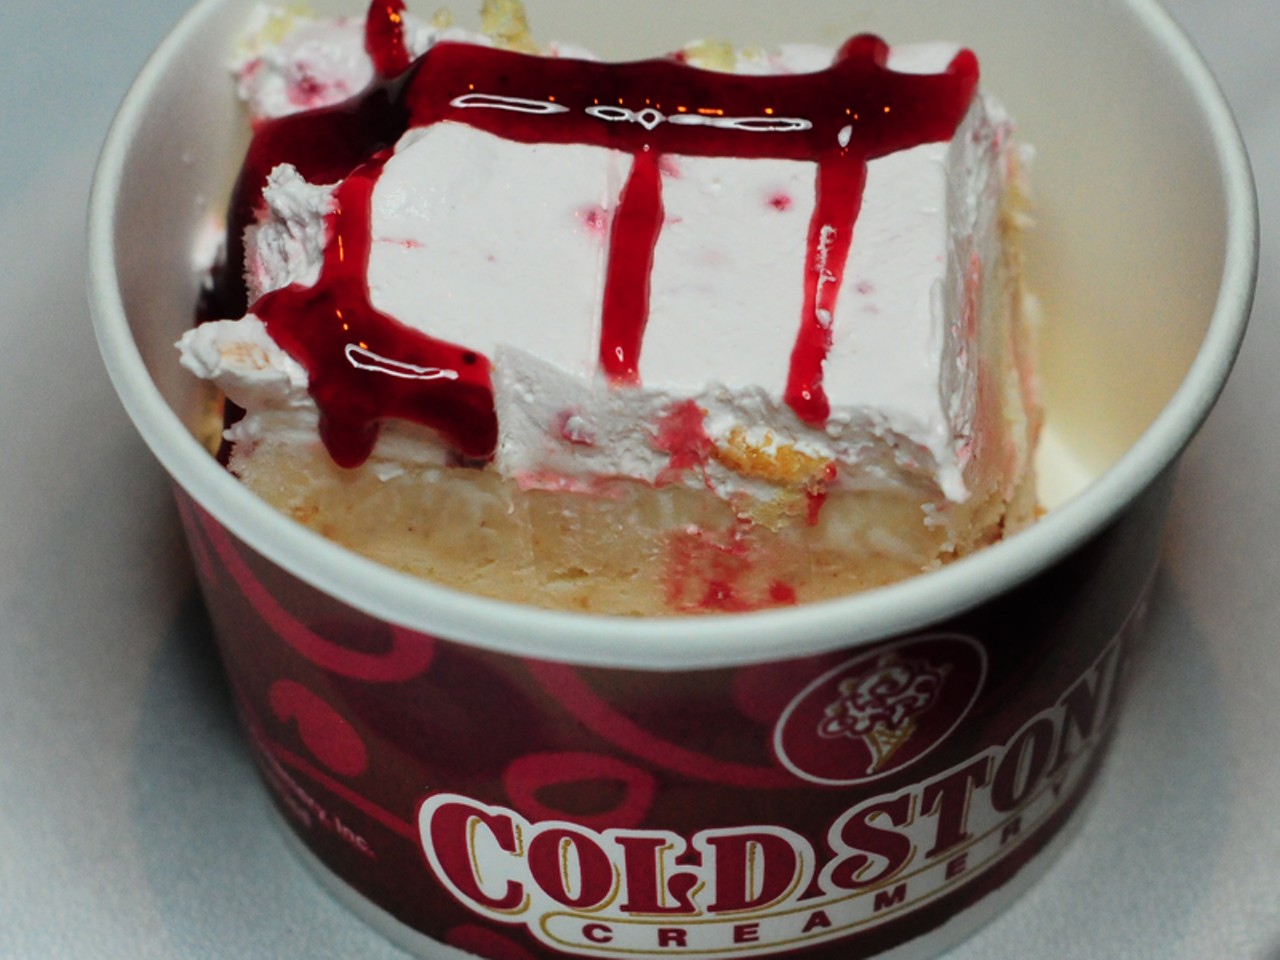 "Cheesecake named 'Desire'" from Coldstone Creamery.